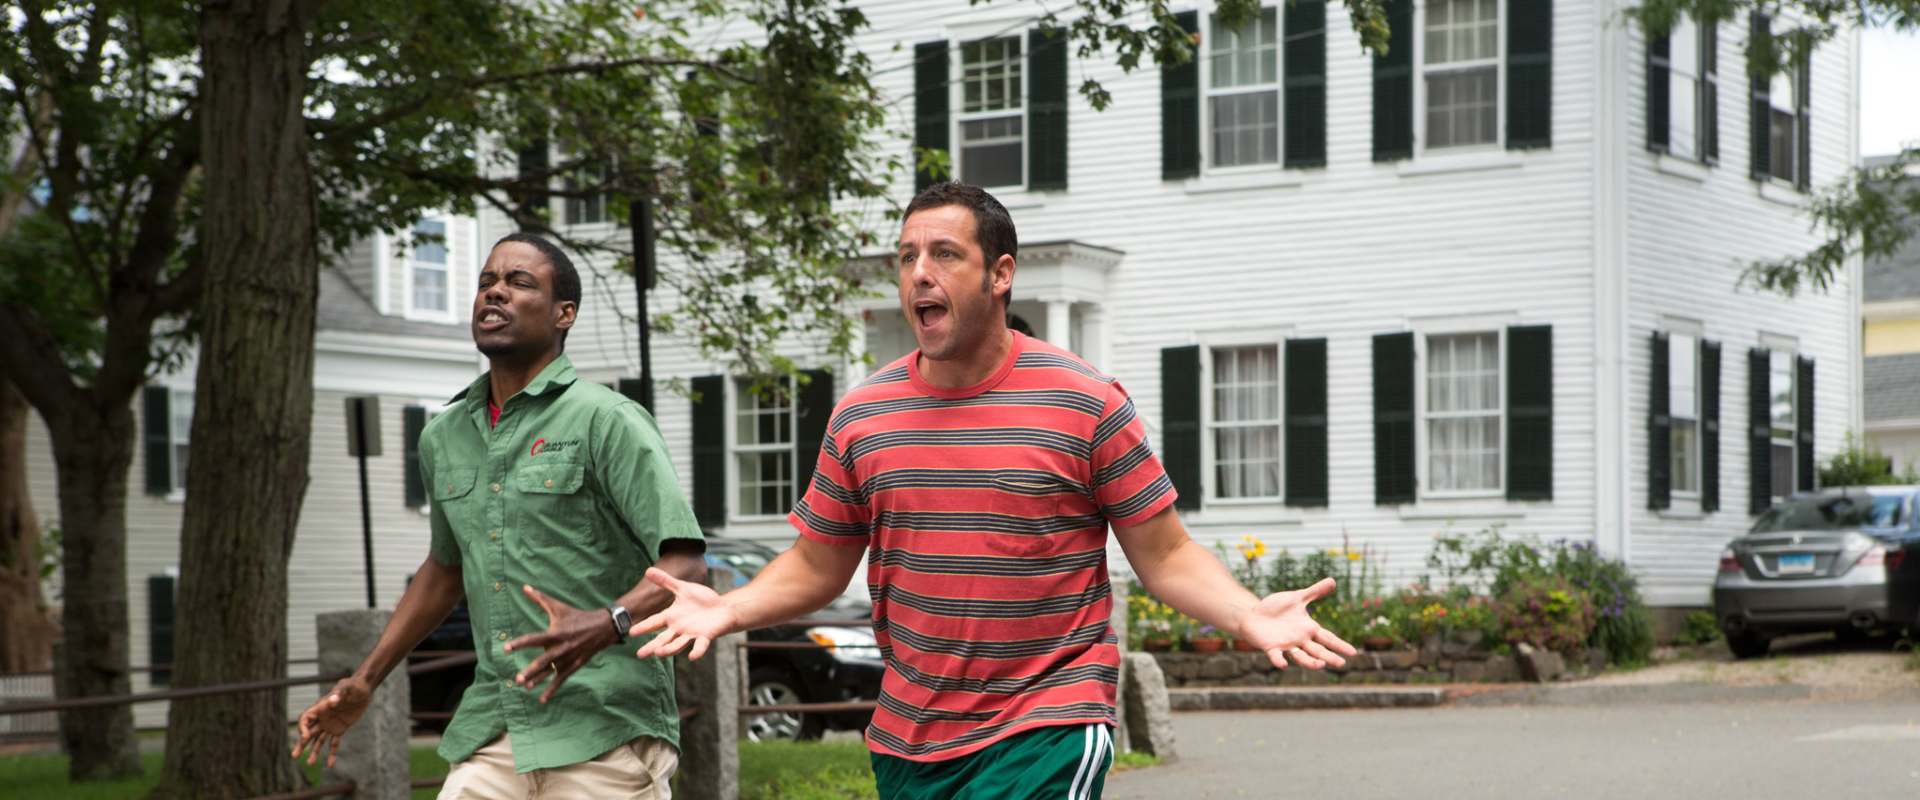 grown ups 2 where to watch